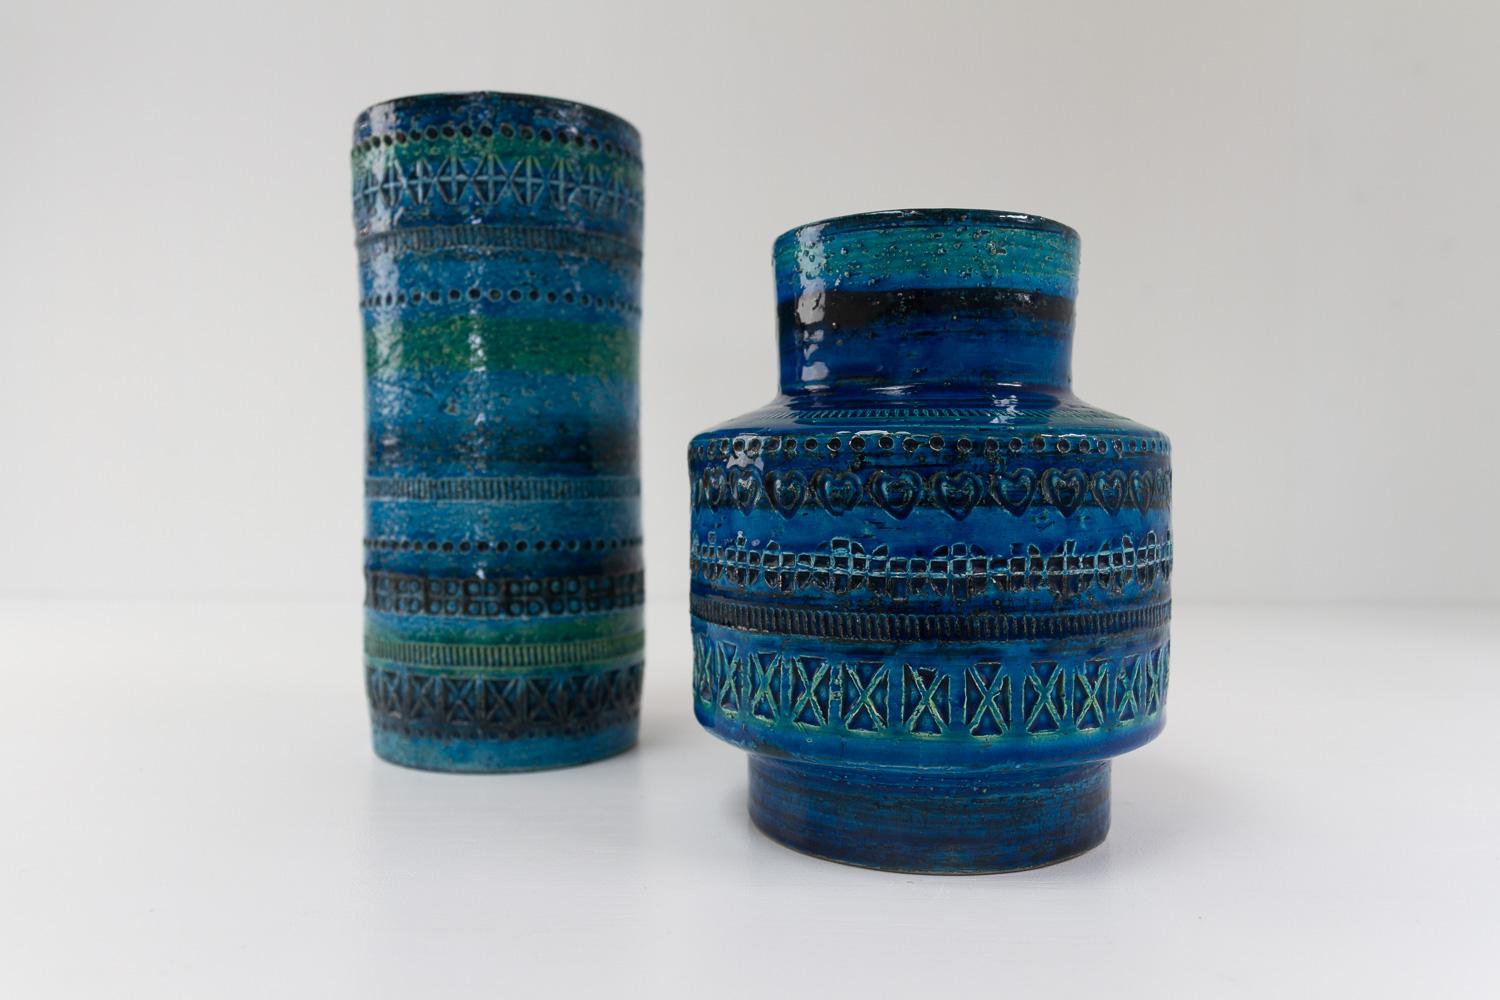 Vintage Italian Ceramic Vases by Aldo Londi for Bitossi 1960s. Set of 2.
Pair of handcrafted cylindrical ceramic vases in Rimini Blu glace with expressive blue, turquoise and green colors.
Tall vase: Diameter 10 cm, height 23 cm. Stamped: 43130/92